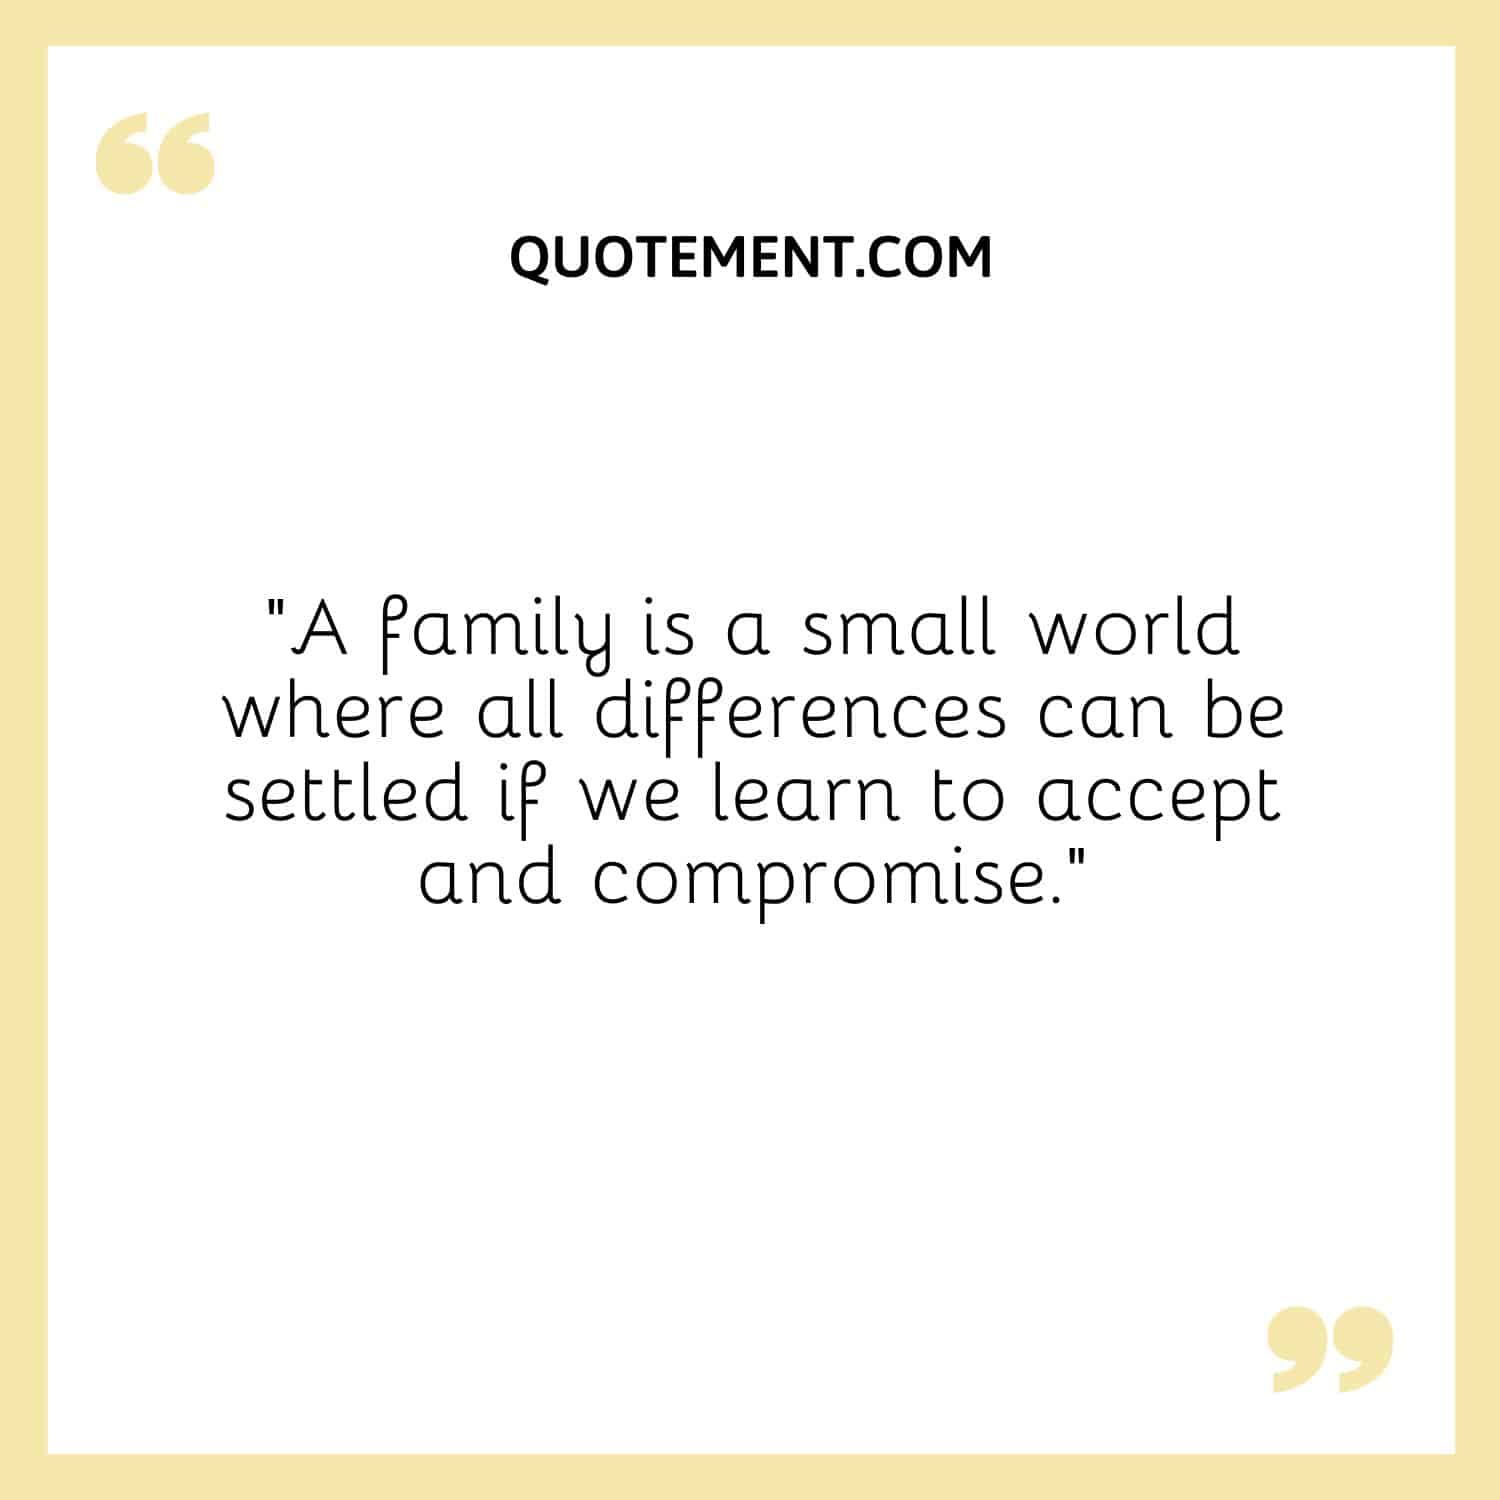 A family is a small world where all differences can be settled if we learn to accept and compromise